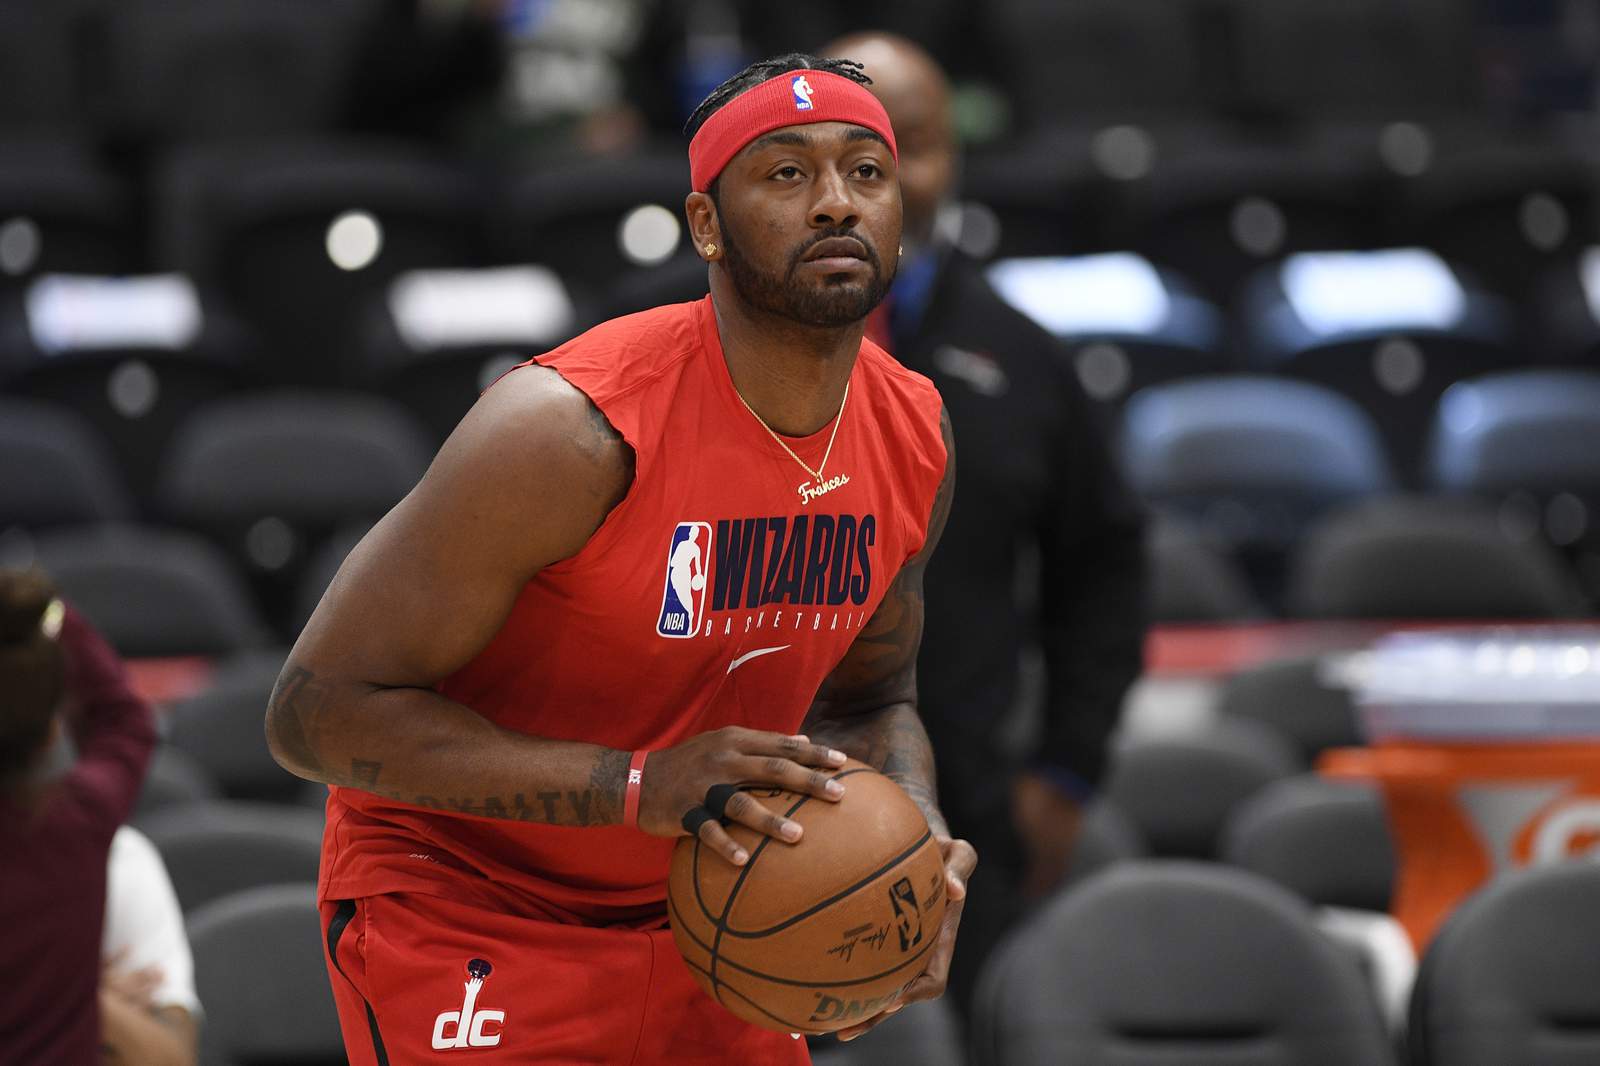 In Rockets trade with Wizards, Wall’s health will be questioned in first action since 2018 season